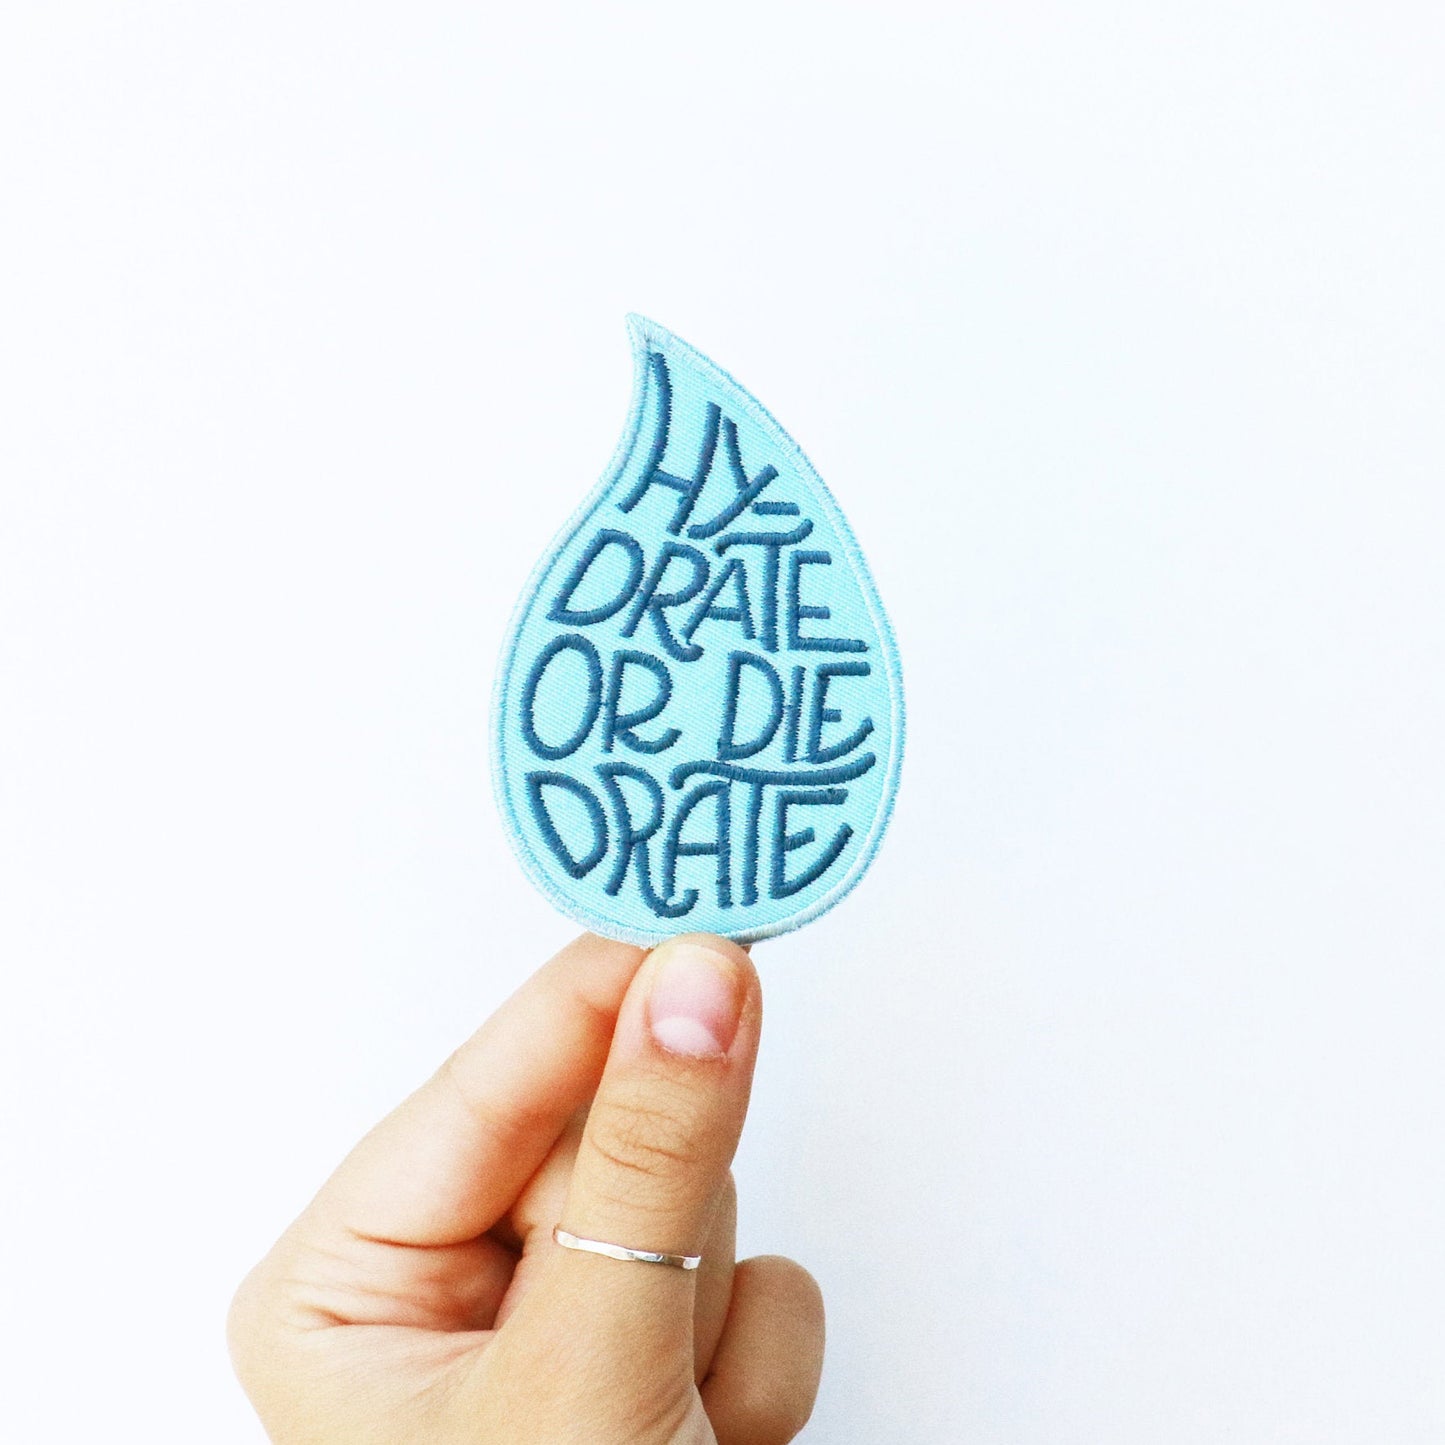 Hydrate or Die-drate Patch